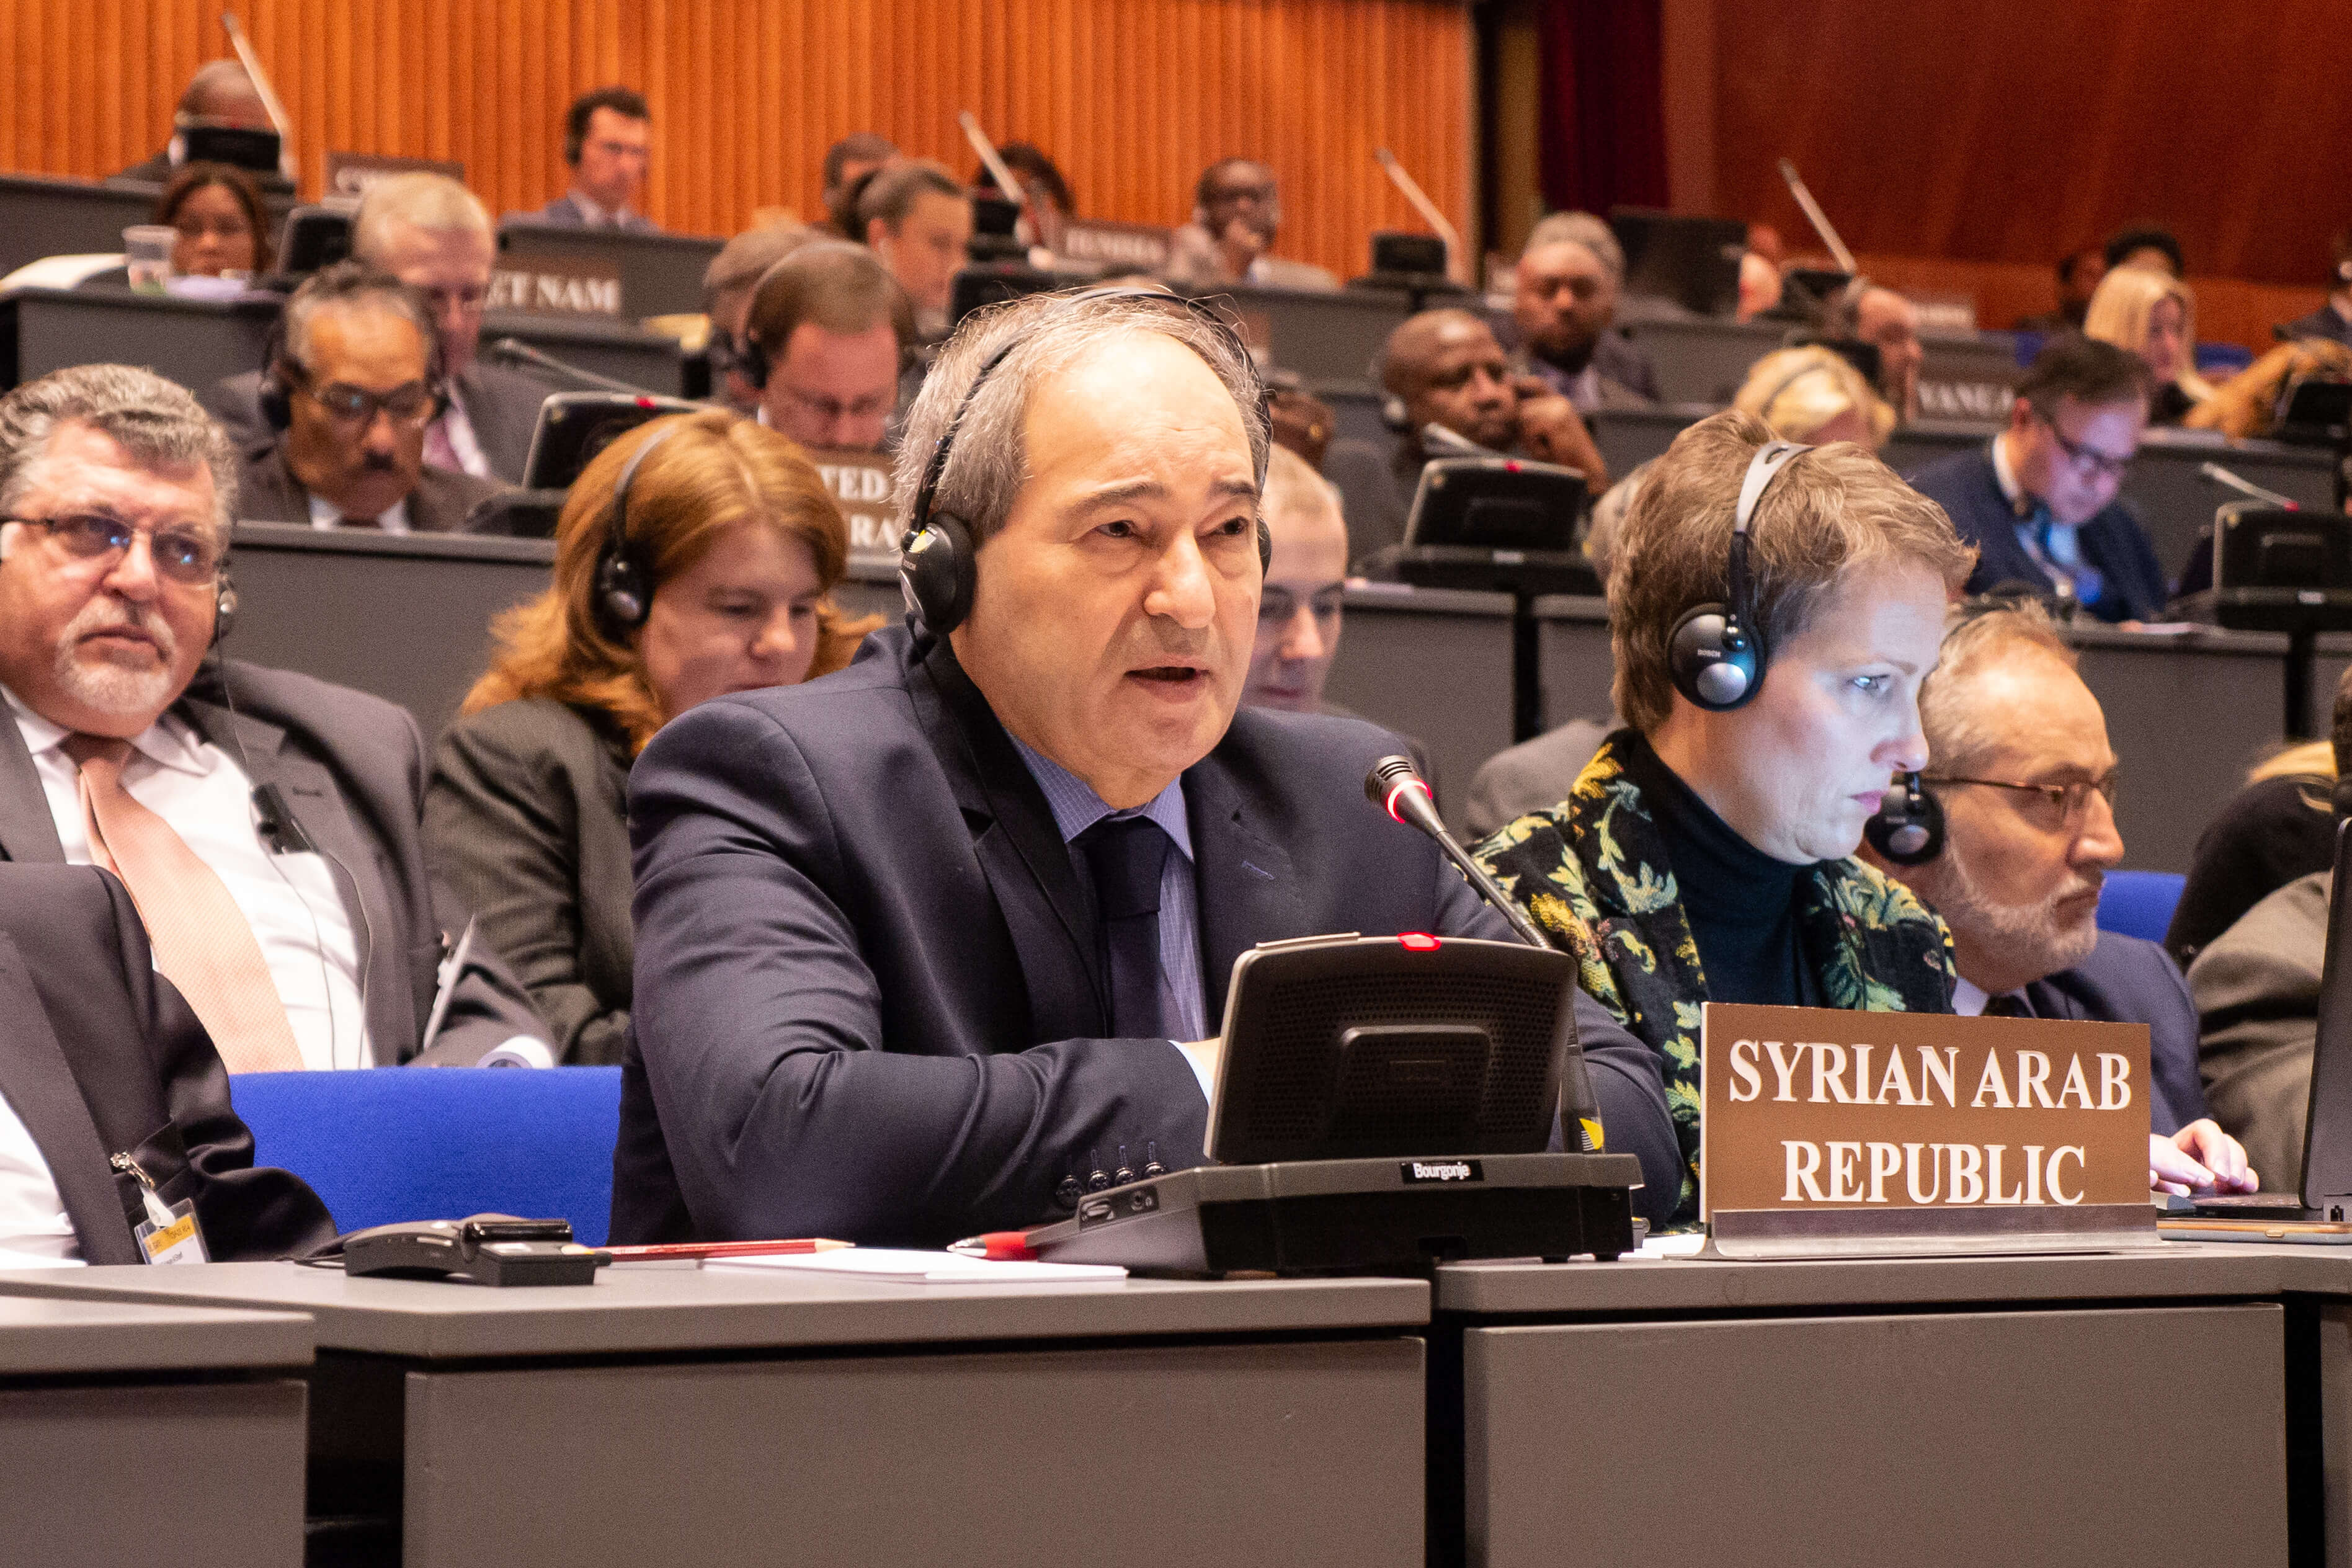 The Syrian delegation at the Conference of State Parties to the Chemical Weapons Convention, 2018. © OPCW / Flickr